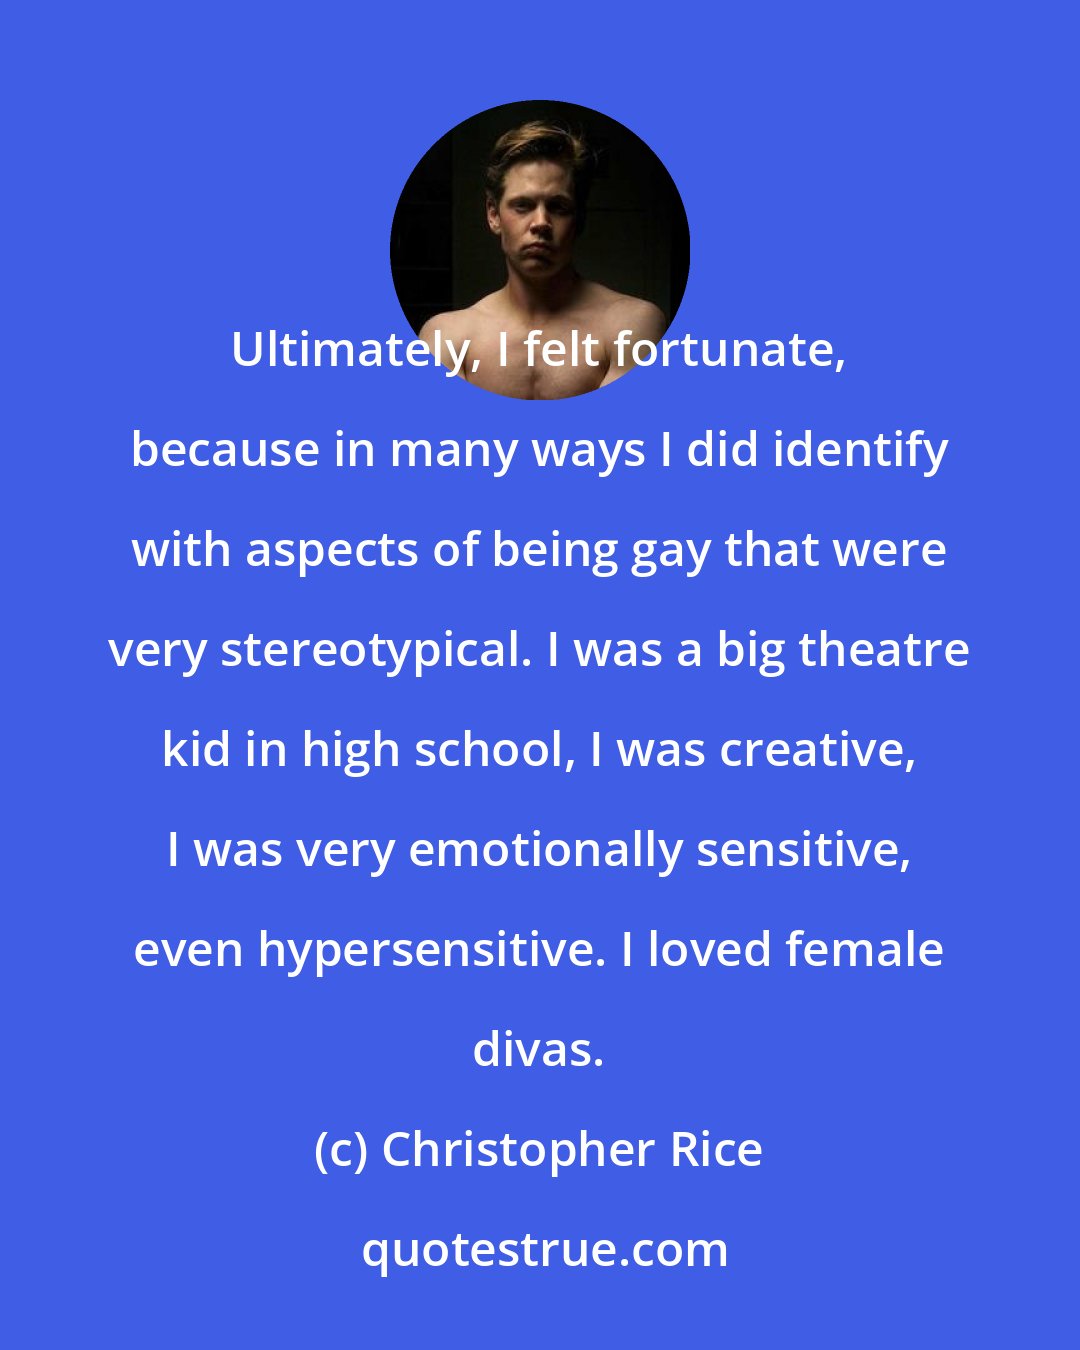 Christopher Rice: Ultimately, I felt fortunate, because in many ways I did identify with aspects of being gay that were very stereotypical. I was a big theatre kid in high school, I was creative, I was very emotionally sensitive, even hypersensitive. I loved female divas.